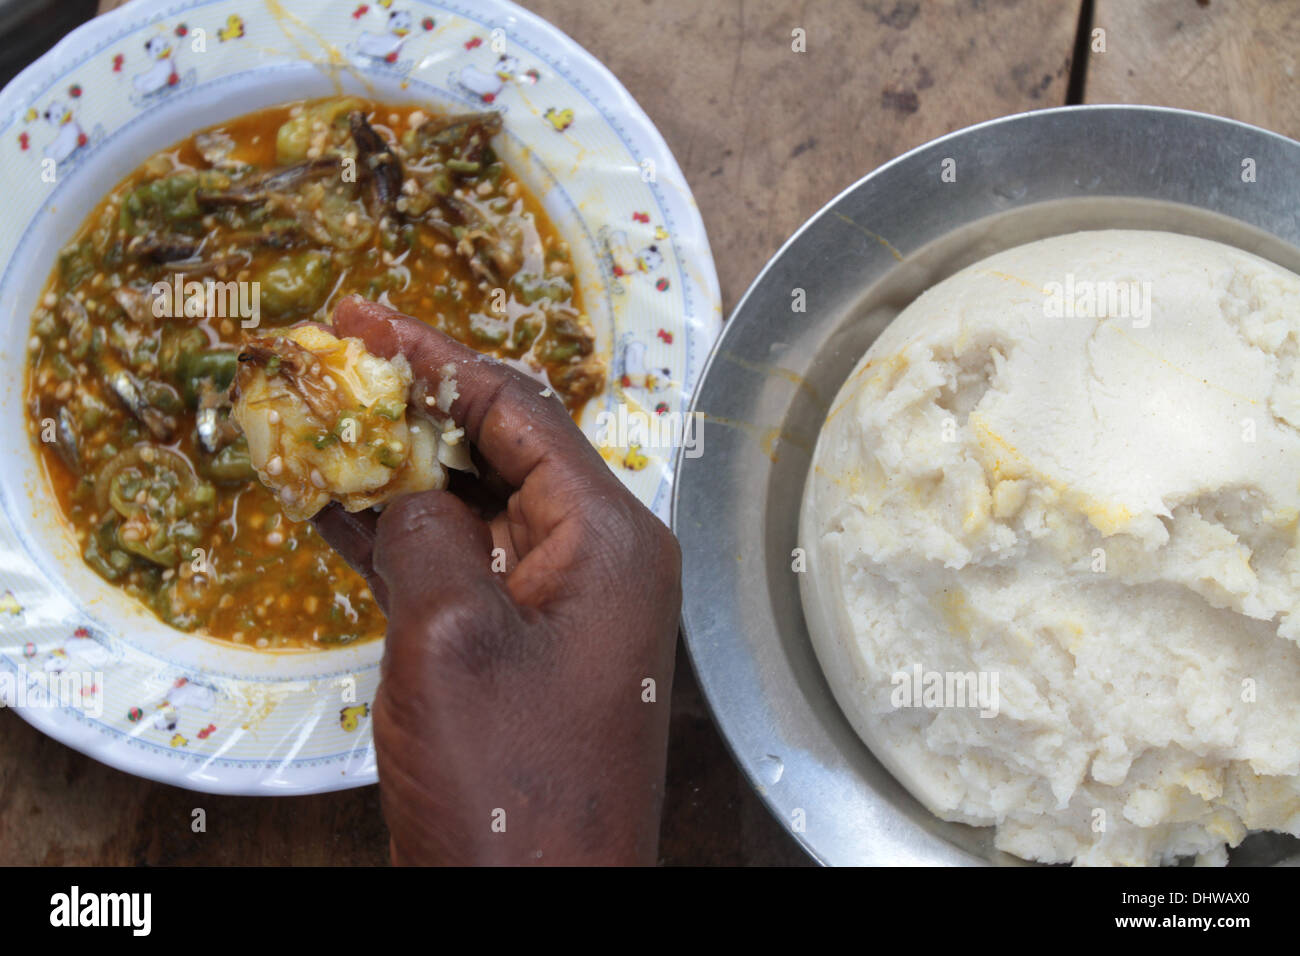 African meal. Stock Photo